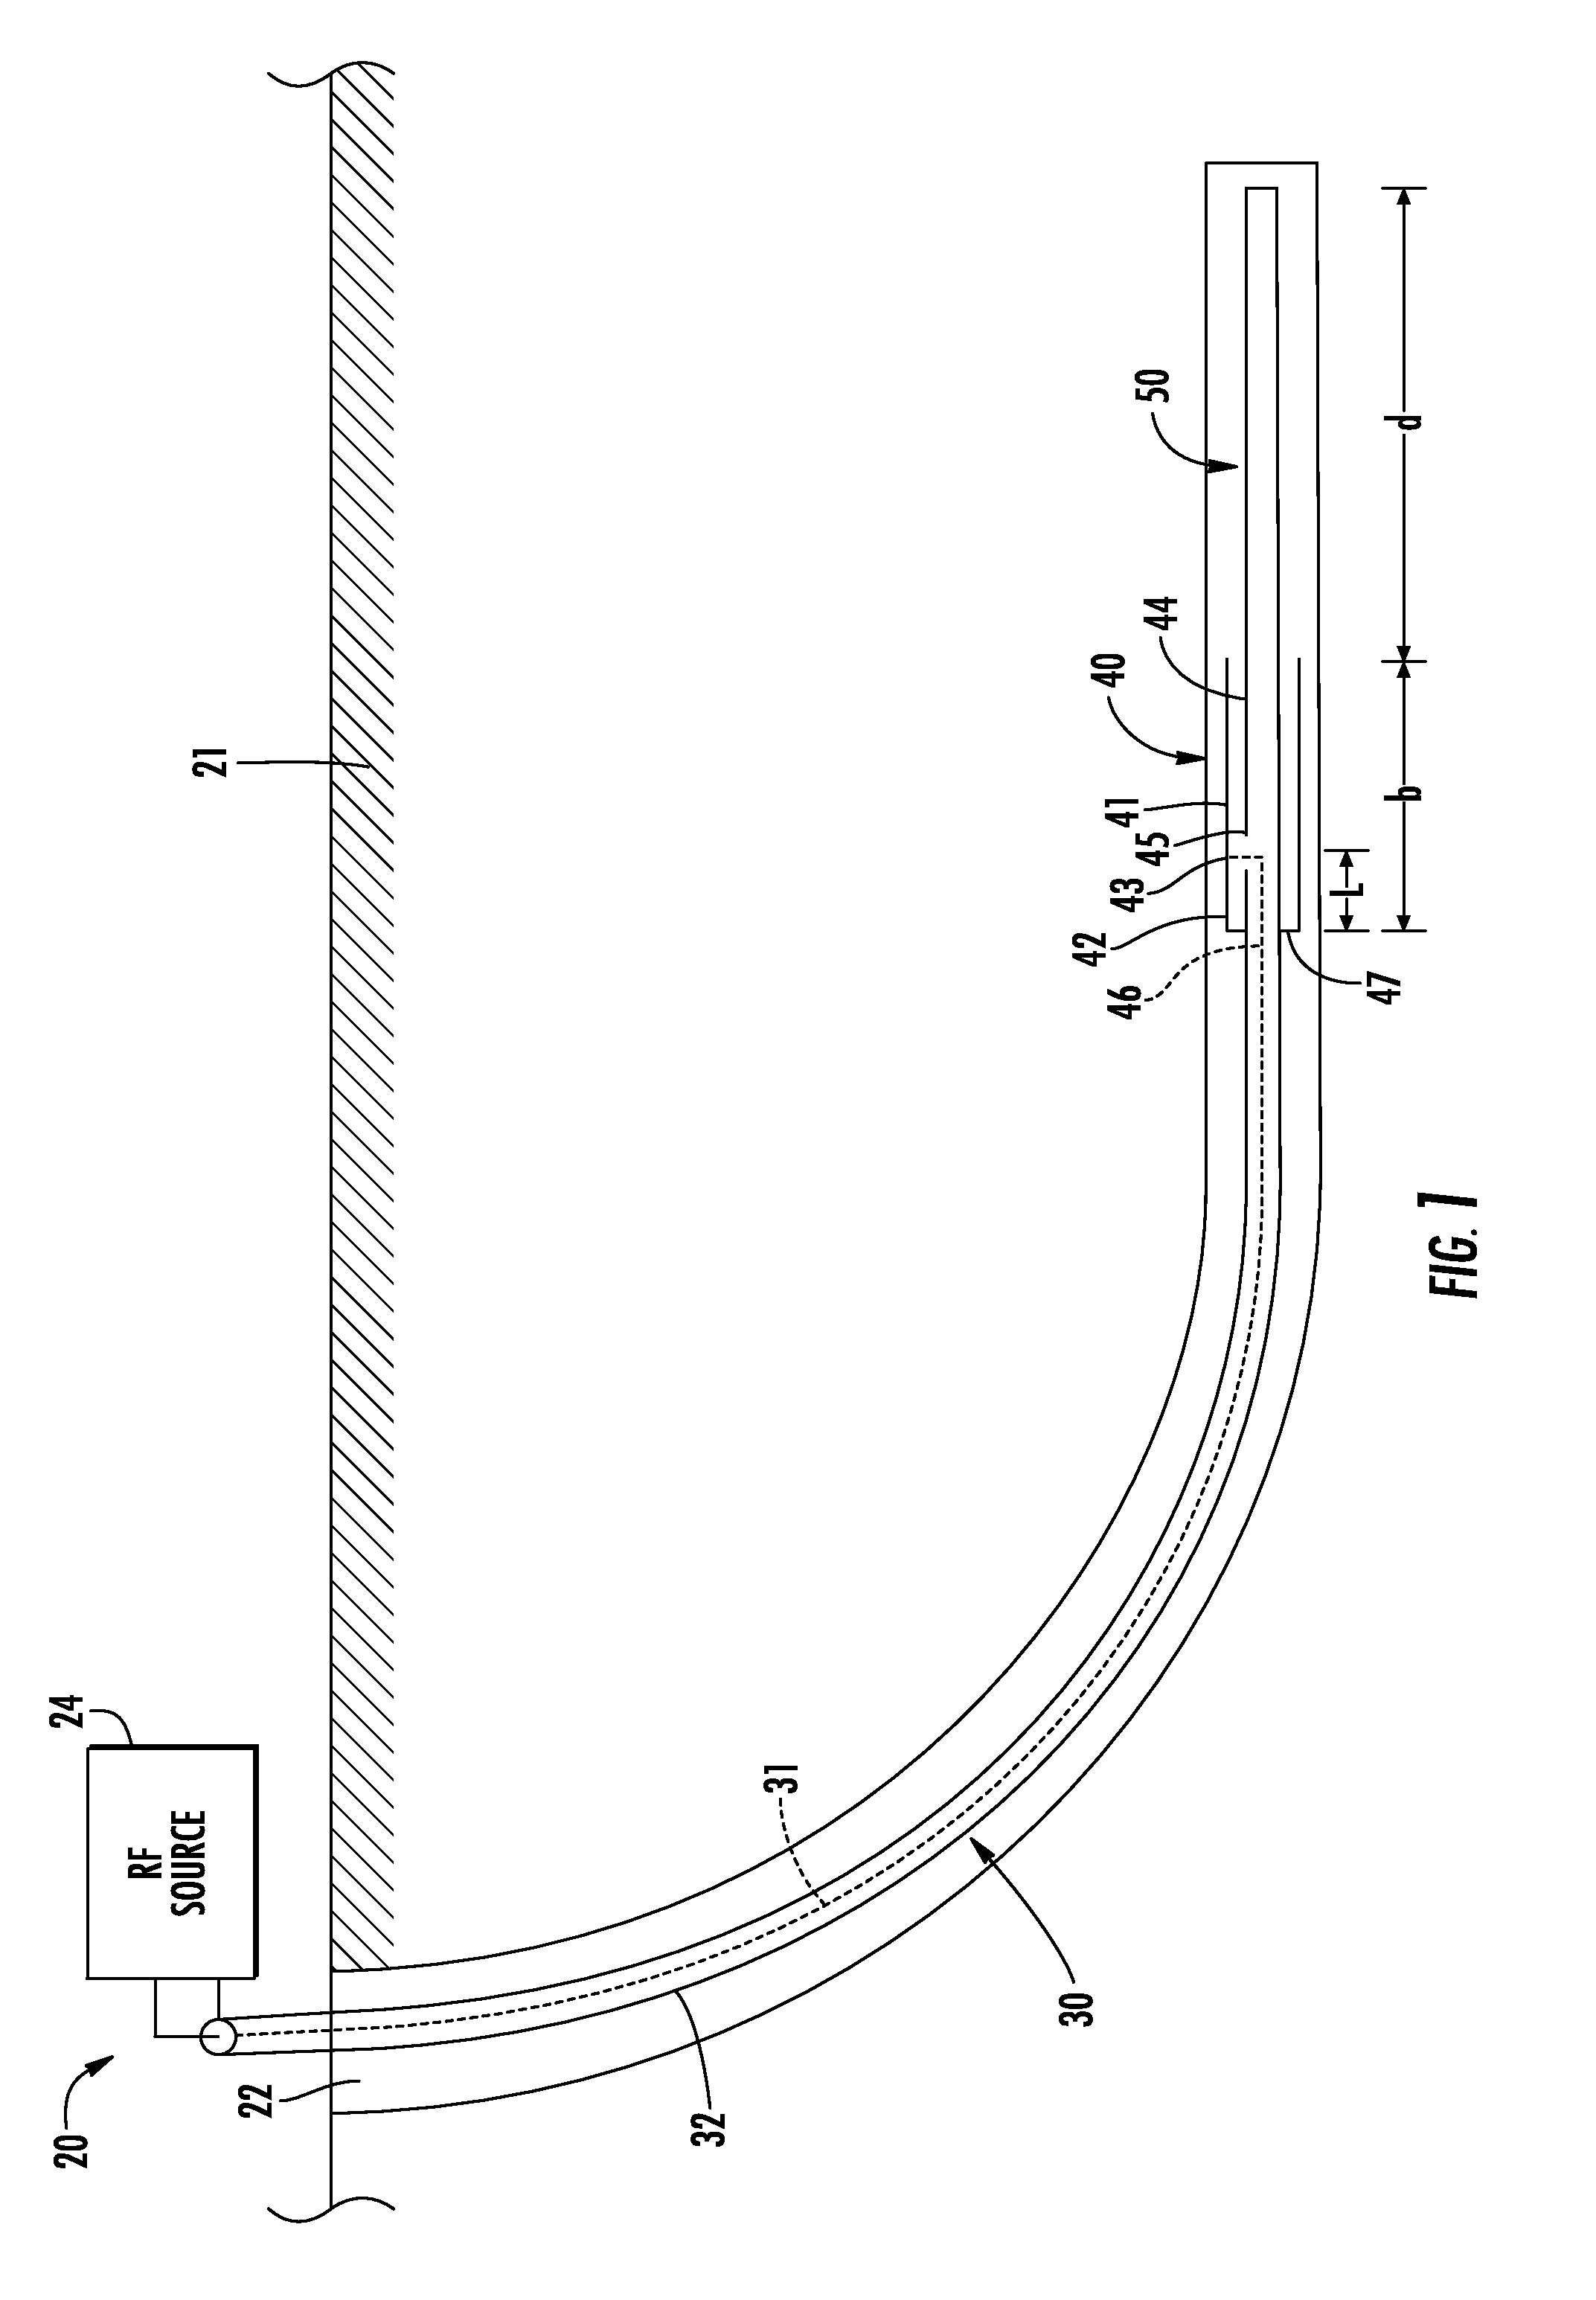 Hydrocarbon resource heating system including sleeved balun and related methods